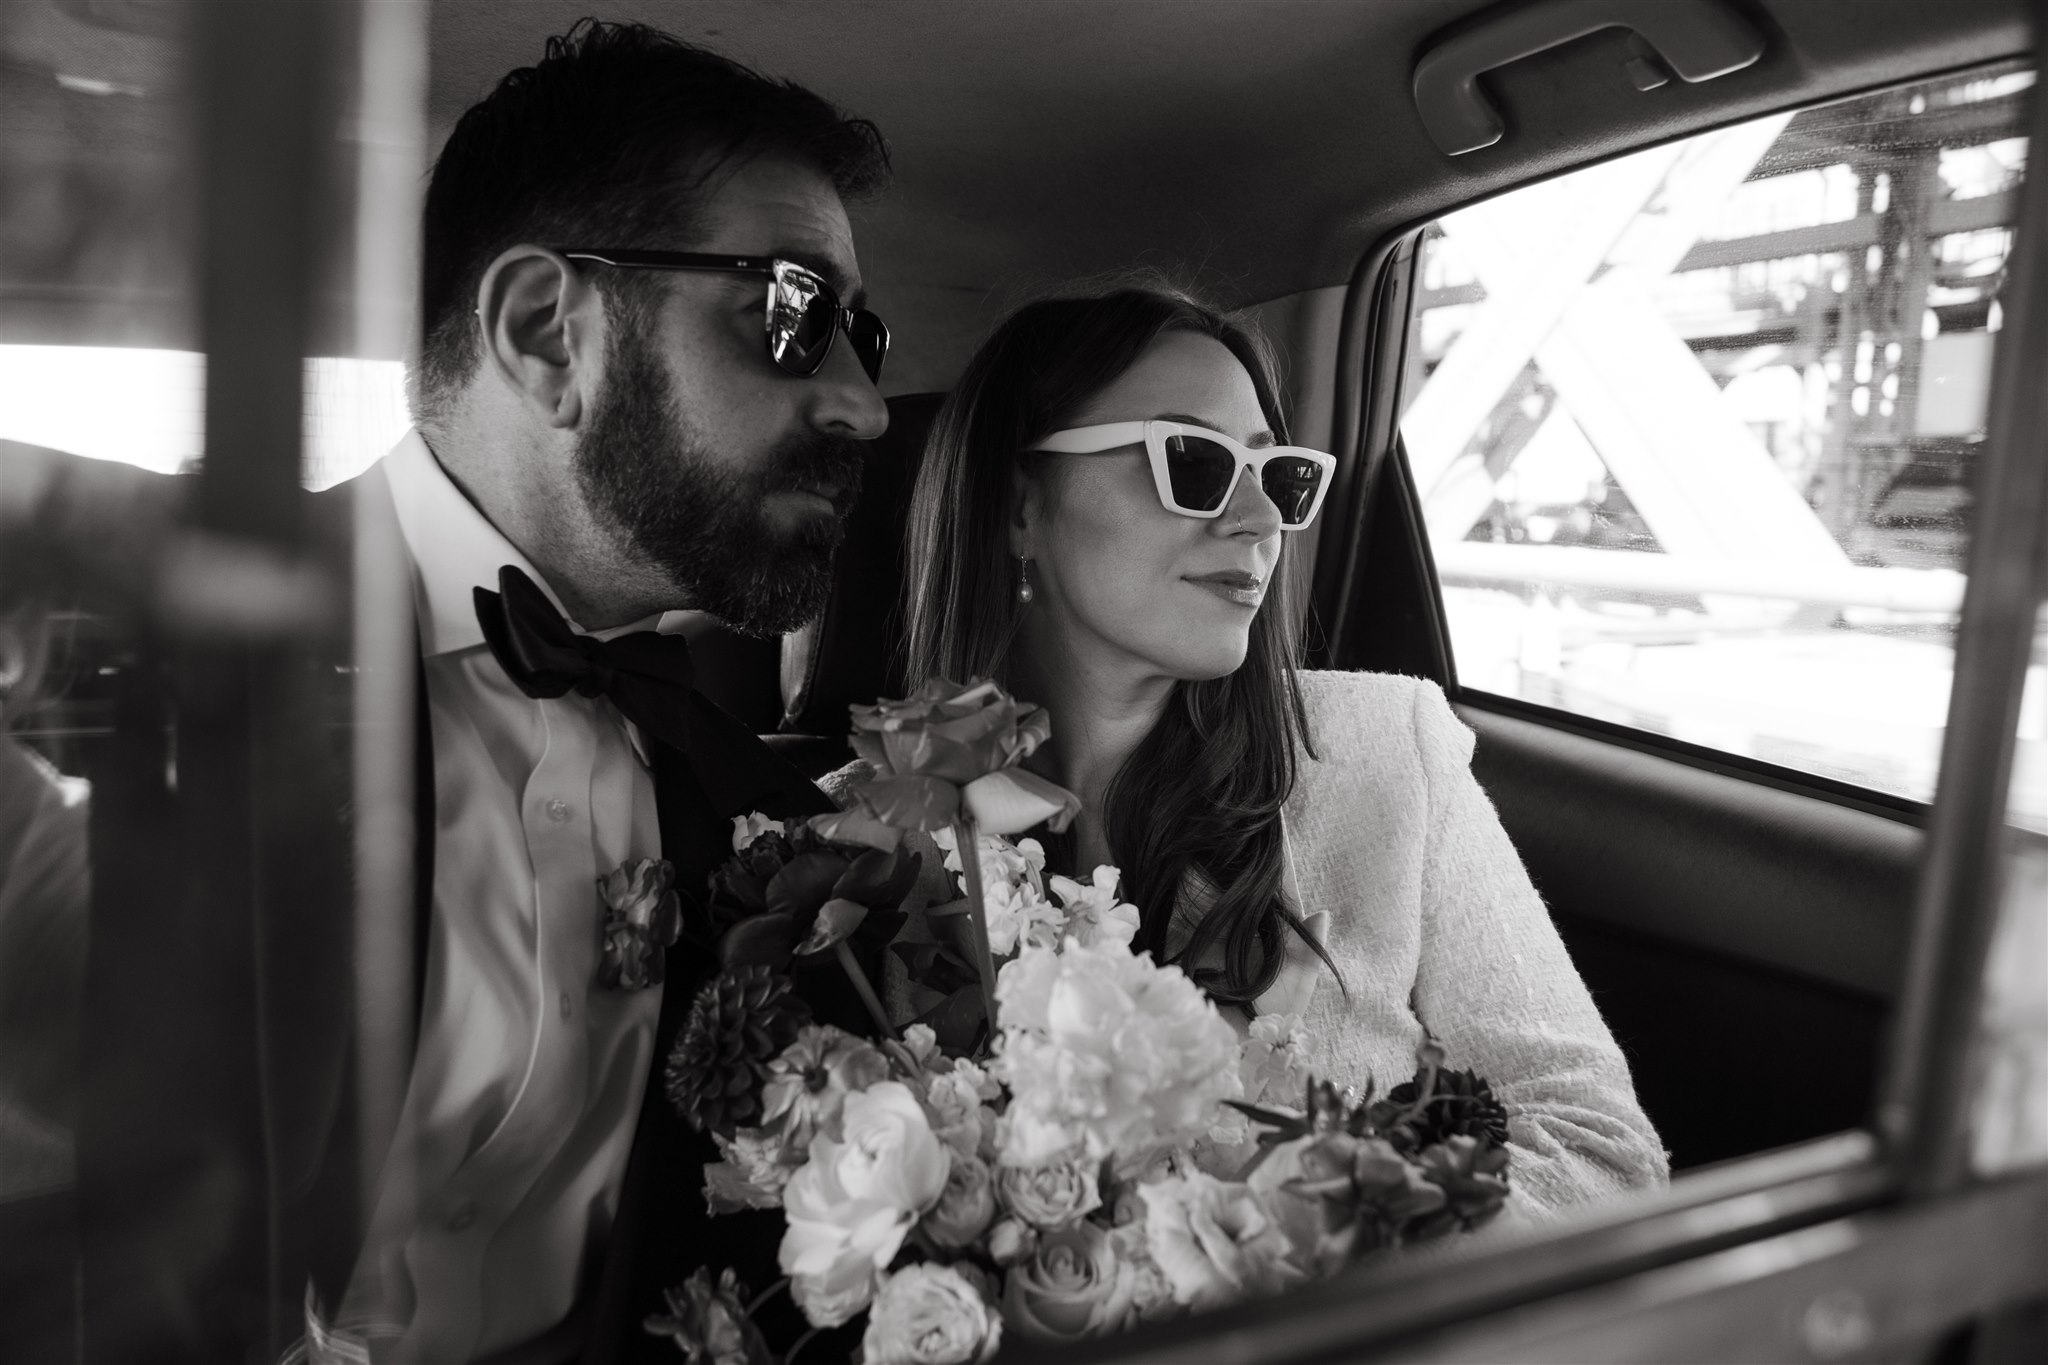 A couple in formal attire with sunglasses sitting in the backseat of a car, the woman holding a bouquet.